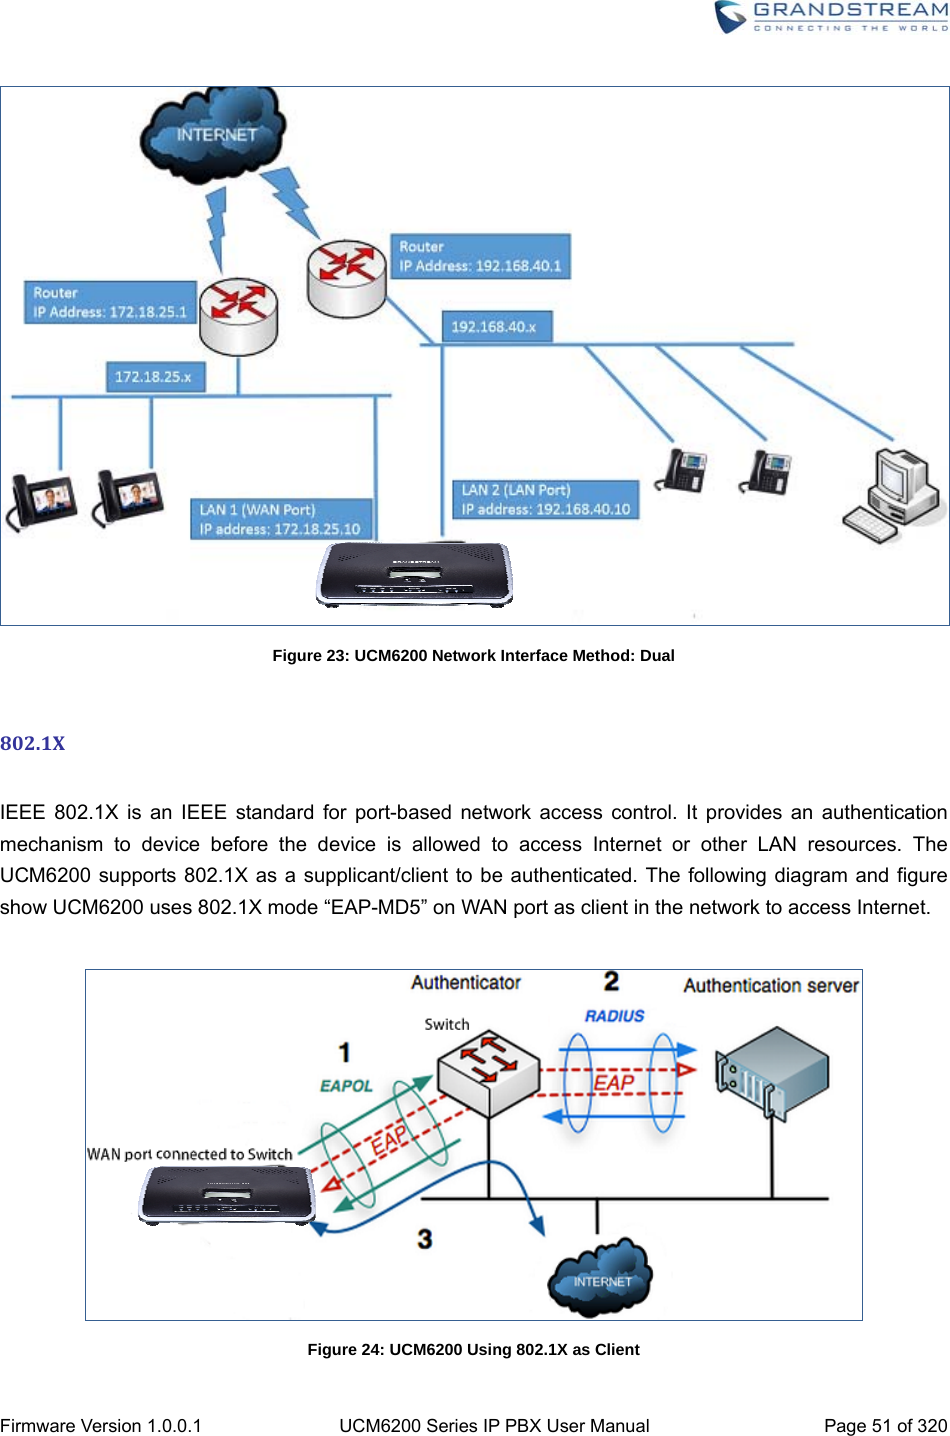  Firmware Version 1.0.0.1  UCM6200 Series IP PBX User Manual  Page 51 of 320  Figure 23: UCM6200 Network Interface Method: Dual  802.1X IEEE 802.1X is an IEEE standard for port-based network access control. It provides an authentication mechanism to device before the device is allowed to access Internet or other LAN resources. The UCM6200 supports 802.1X as a supplicant/client to be authenticated. The following diagram and figure show UCM6200 uses 802.1X mode “EAP-MD5” on WAN port as client in the network to access Internet.   Figure 24: UCM6200 Using 802.1X as Client 